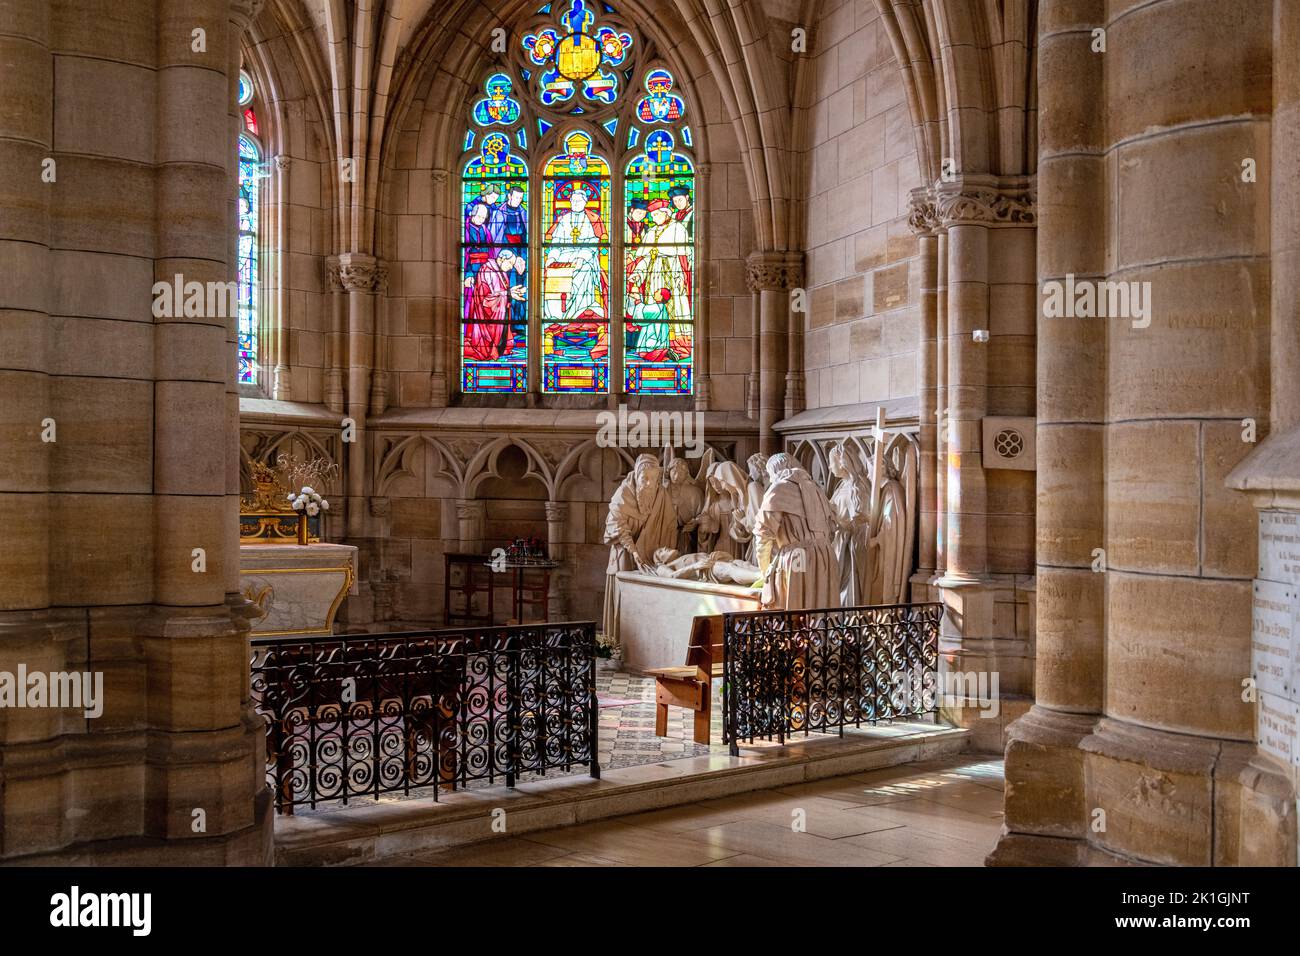 The alter and statue inside the Basilica Notre Dame de l'epine in Marne North East France. Stock Photo